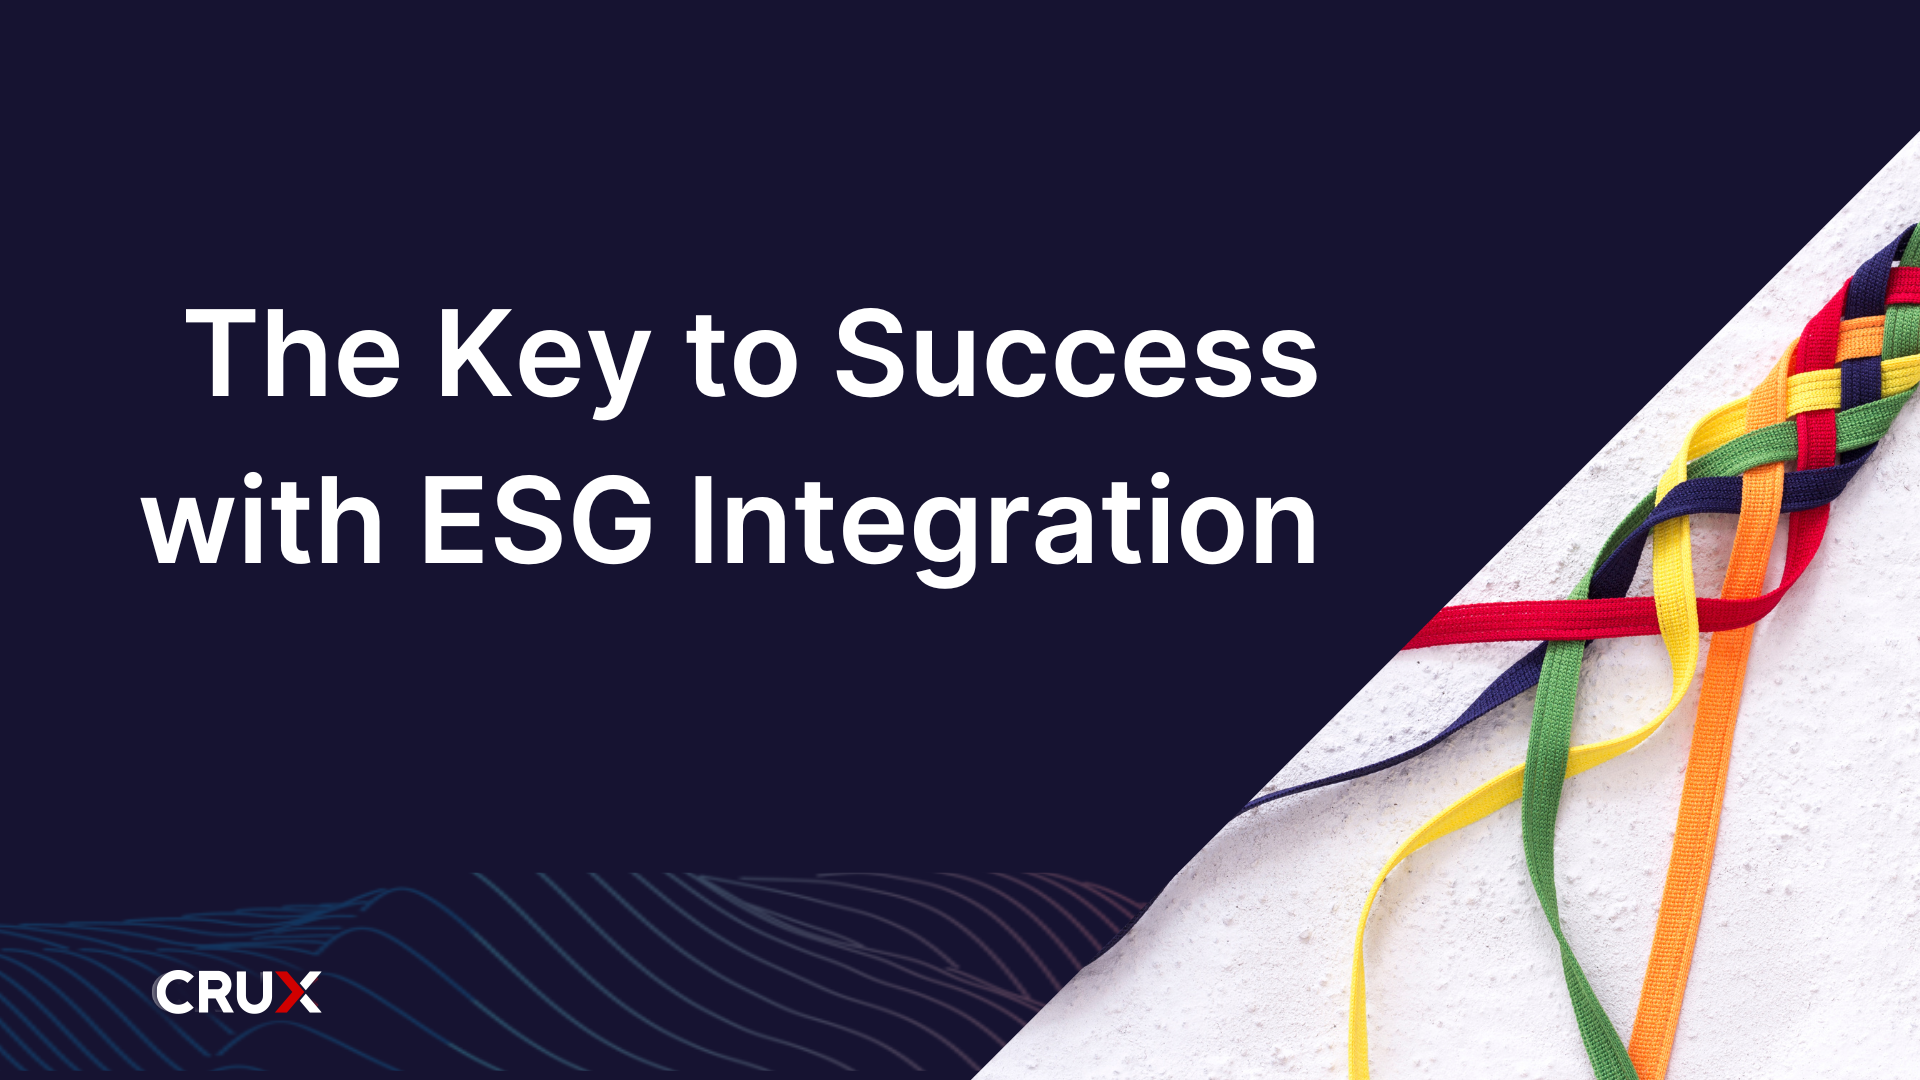 Remaining Objective & Methodical is the Key to a Successful ESG Integration